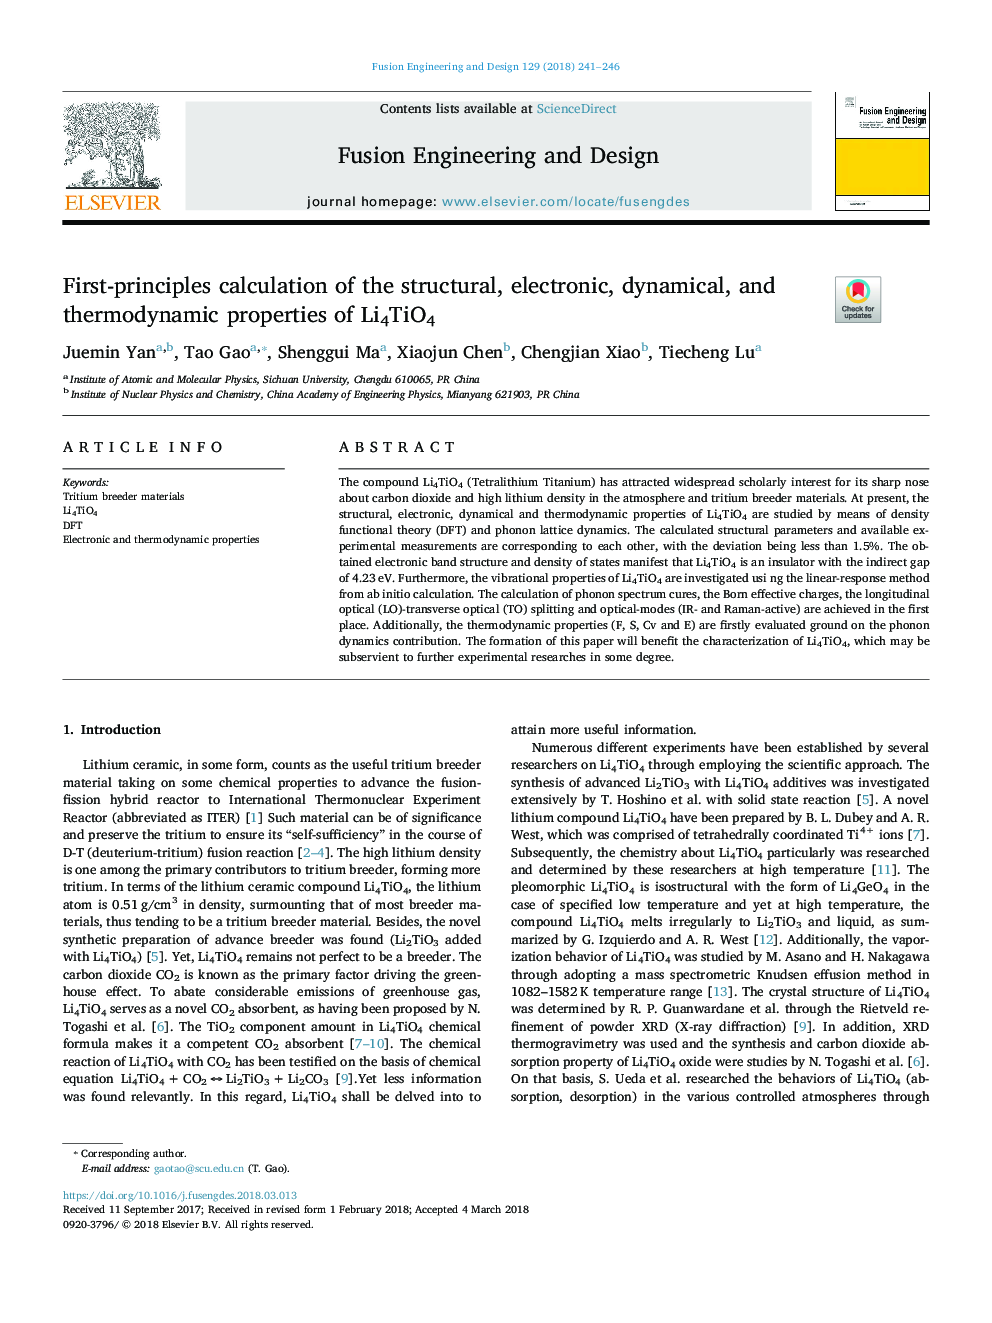 First-principles calculation of the structural, electronic, dynamical, and thermodynamic properties of Li4TiO4